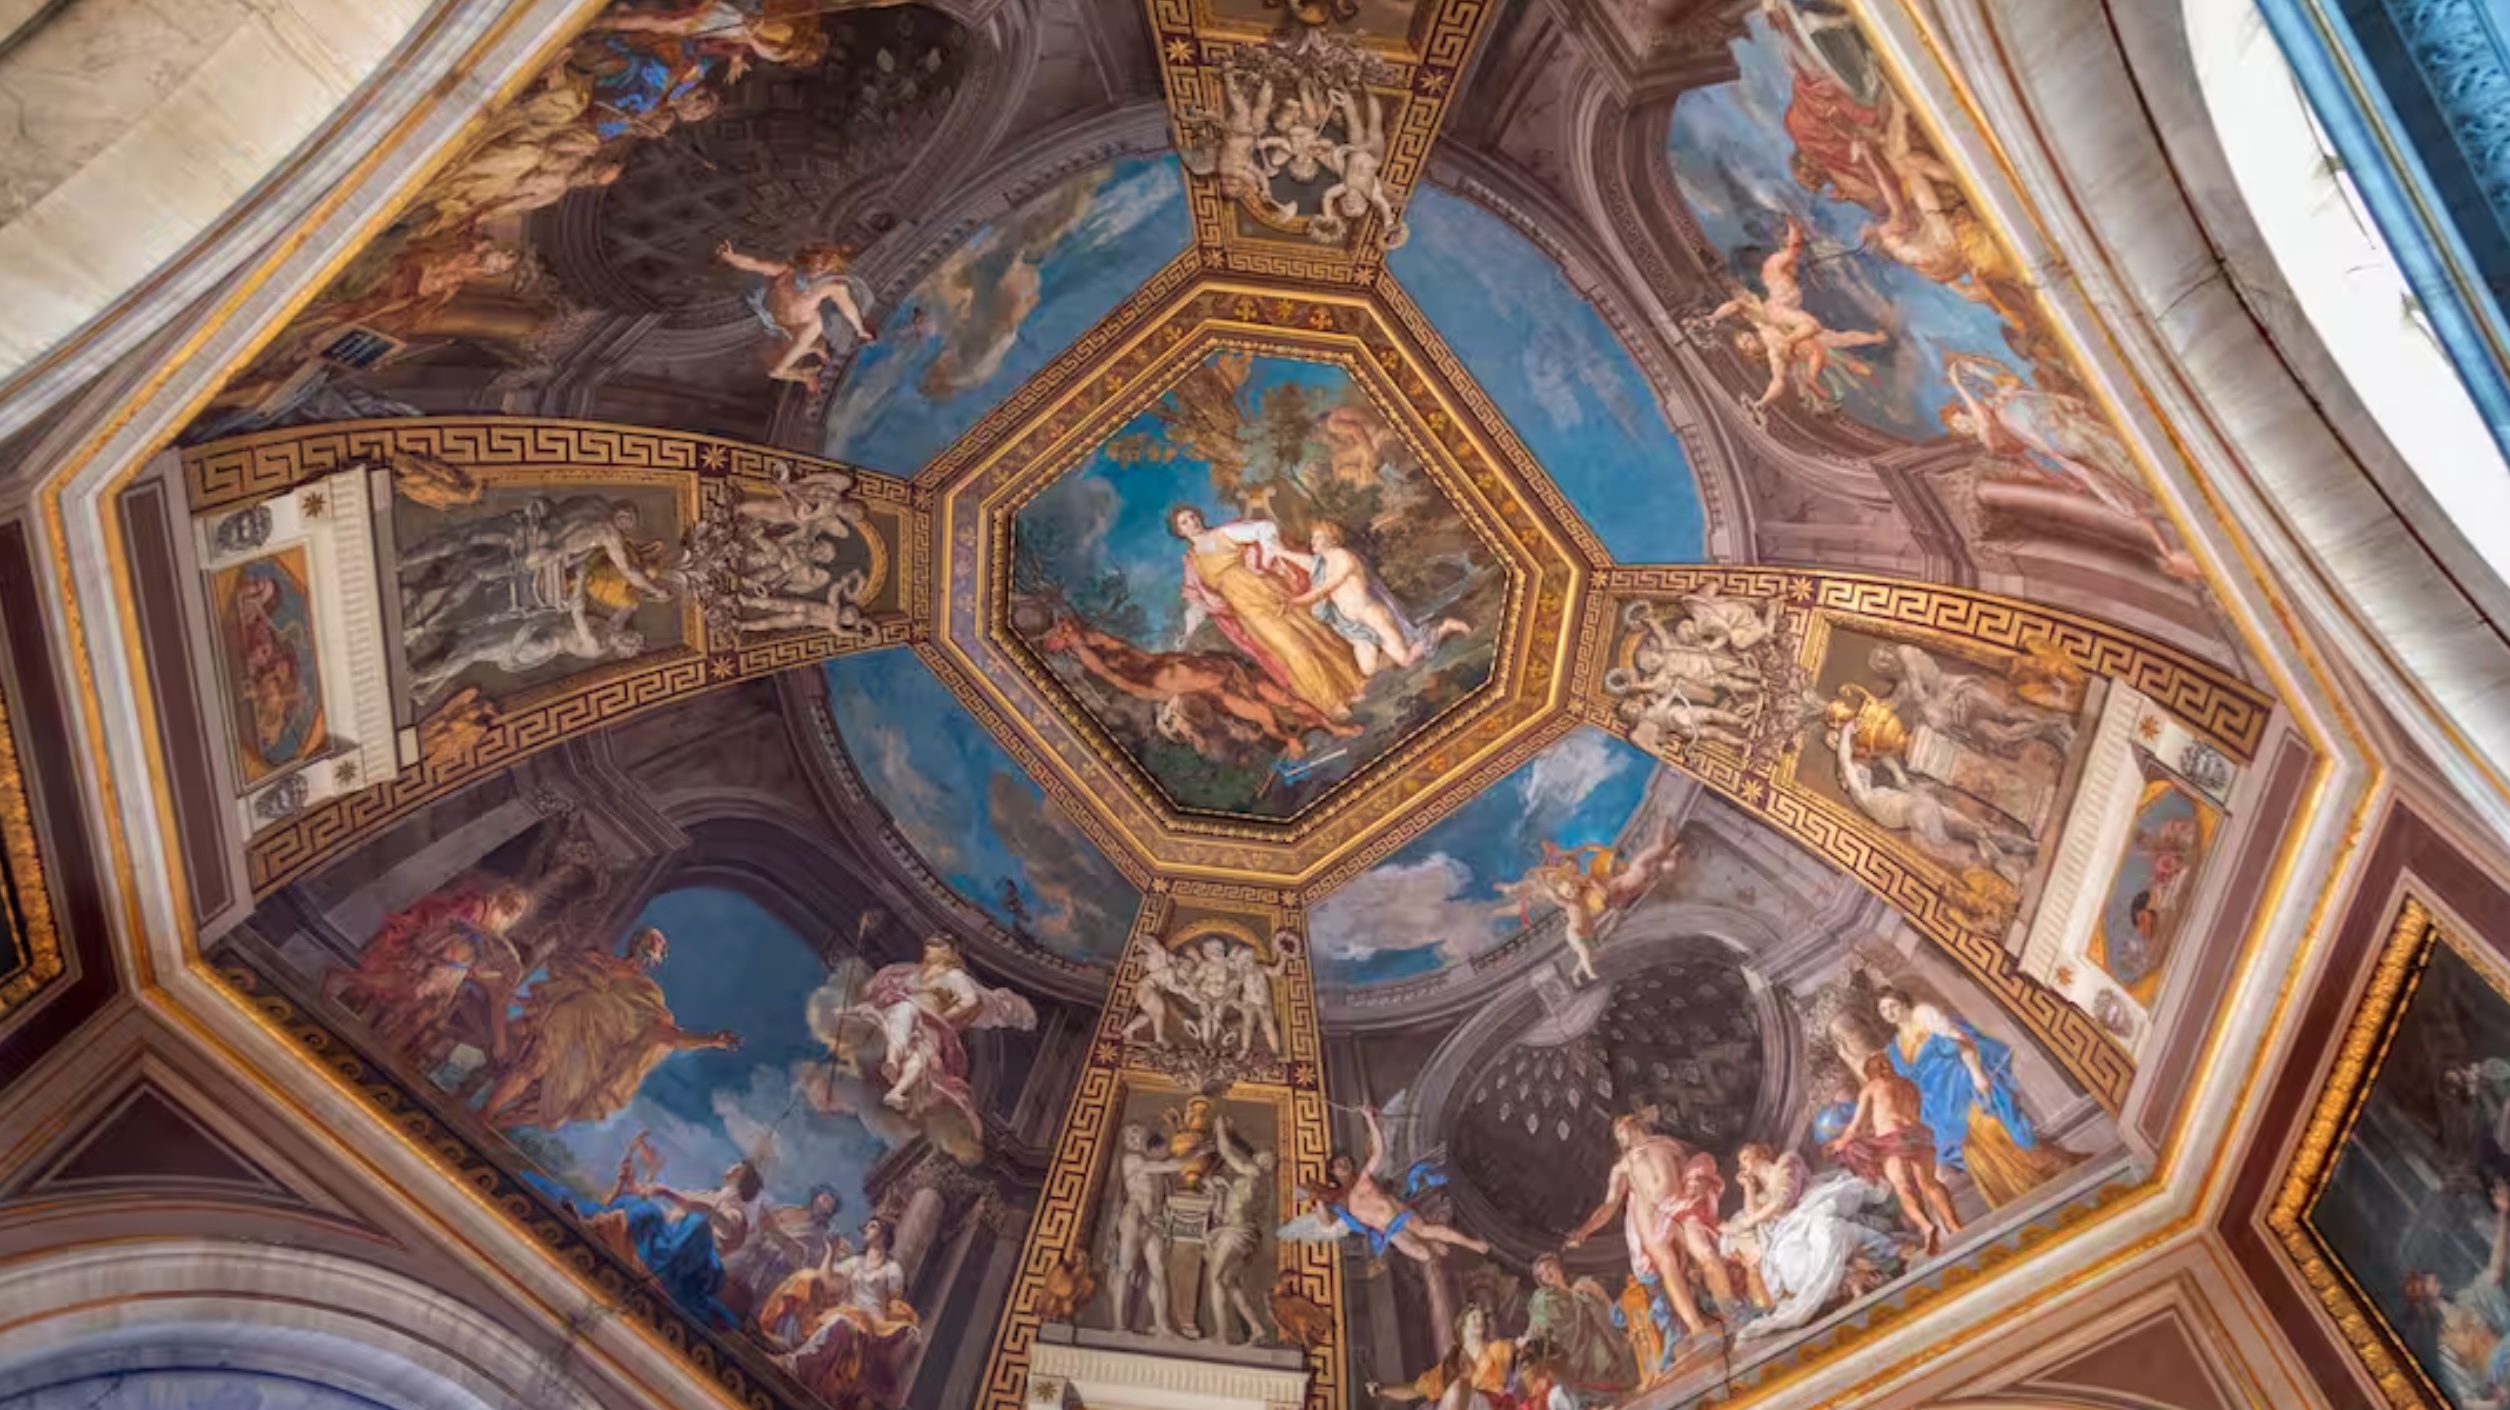 vew of the Sistine Chapel ceiling